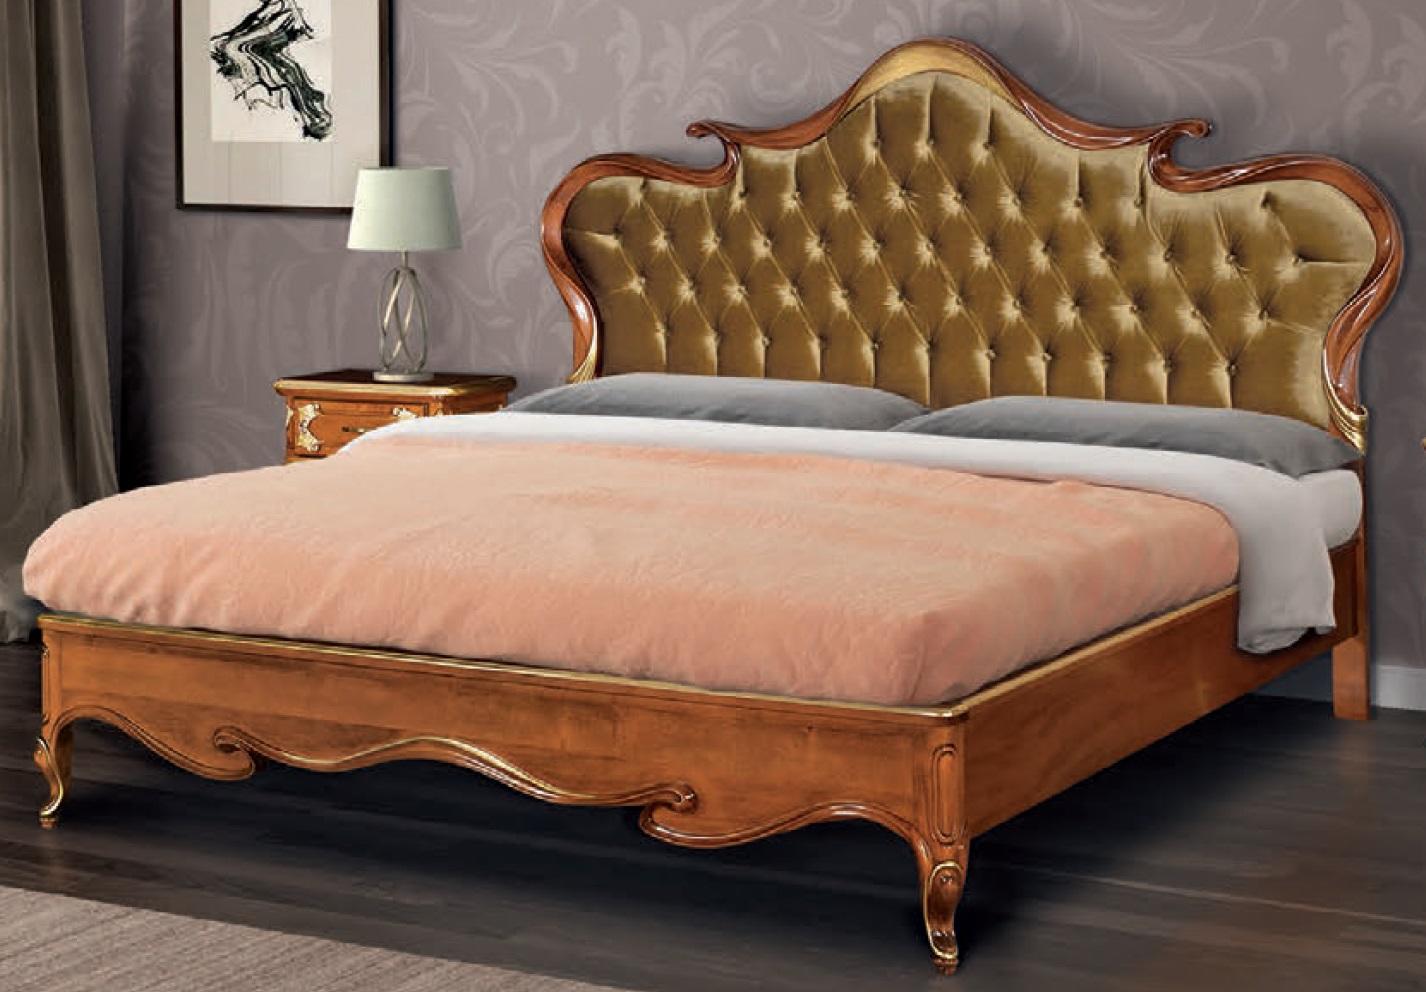 Chesterfield Bed Upholstery Design Luxury Double Hotel Beds Italian Wood